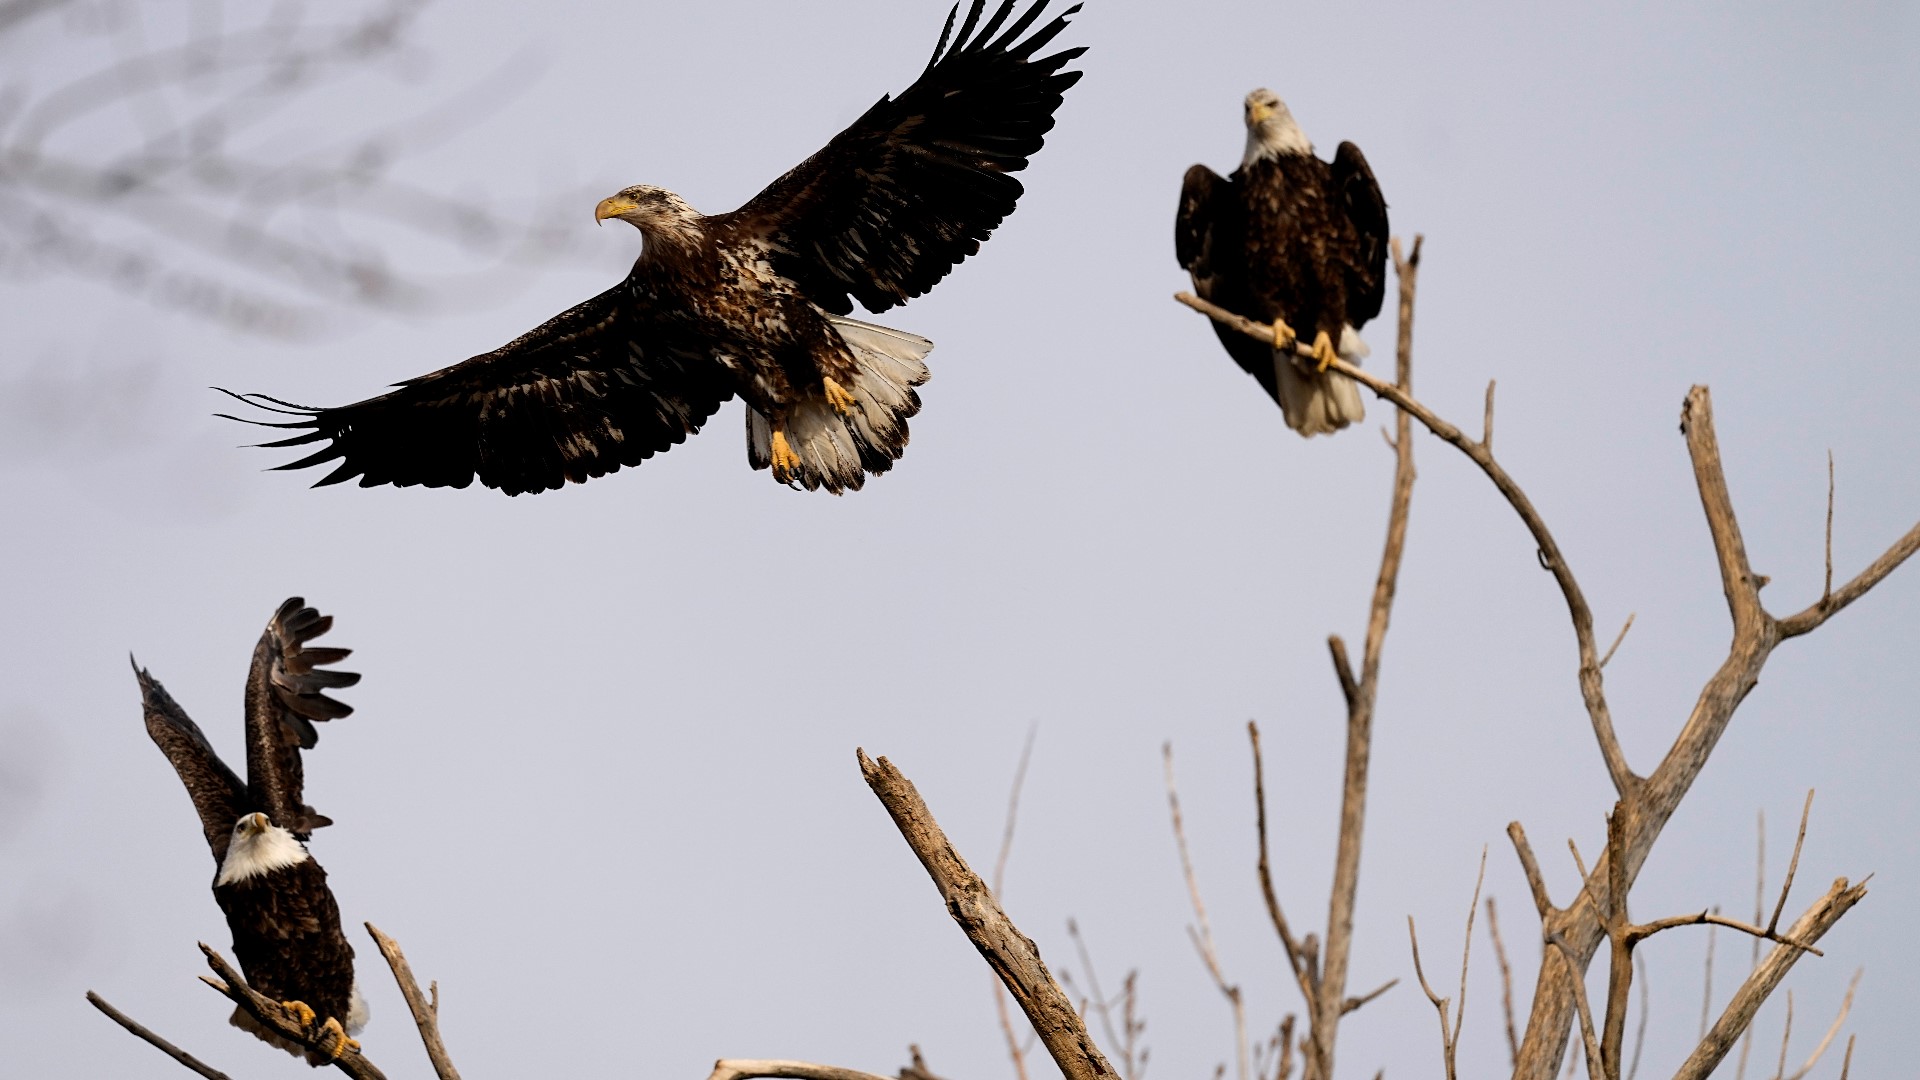 The Show Me State is a great place to see bald eagles. According to the Visit Missouri website, there are about 500 active nests in the state.